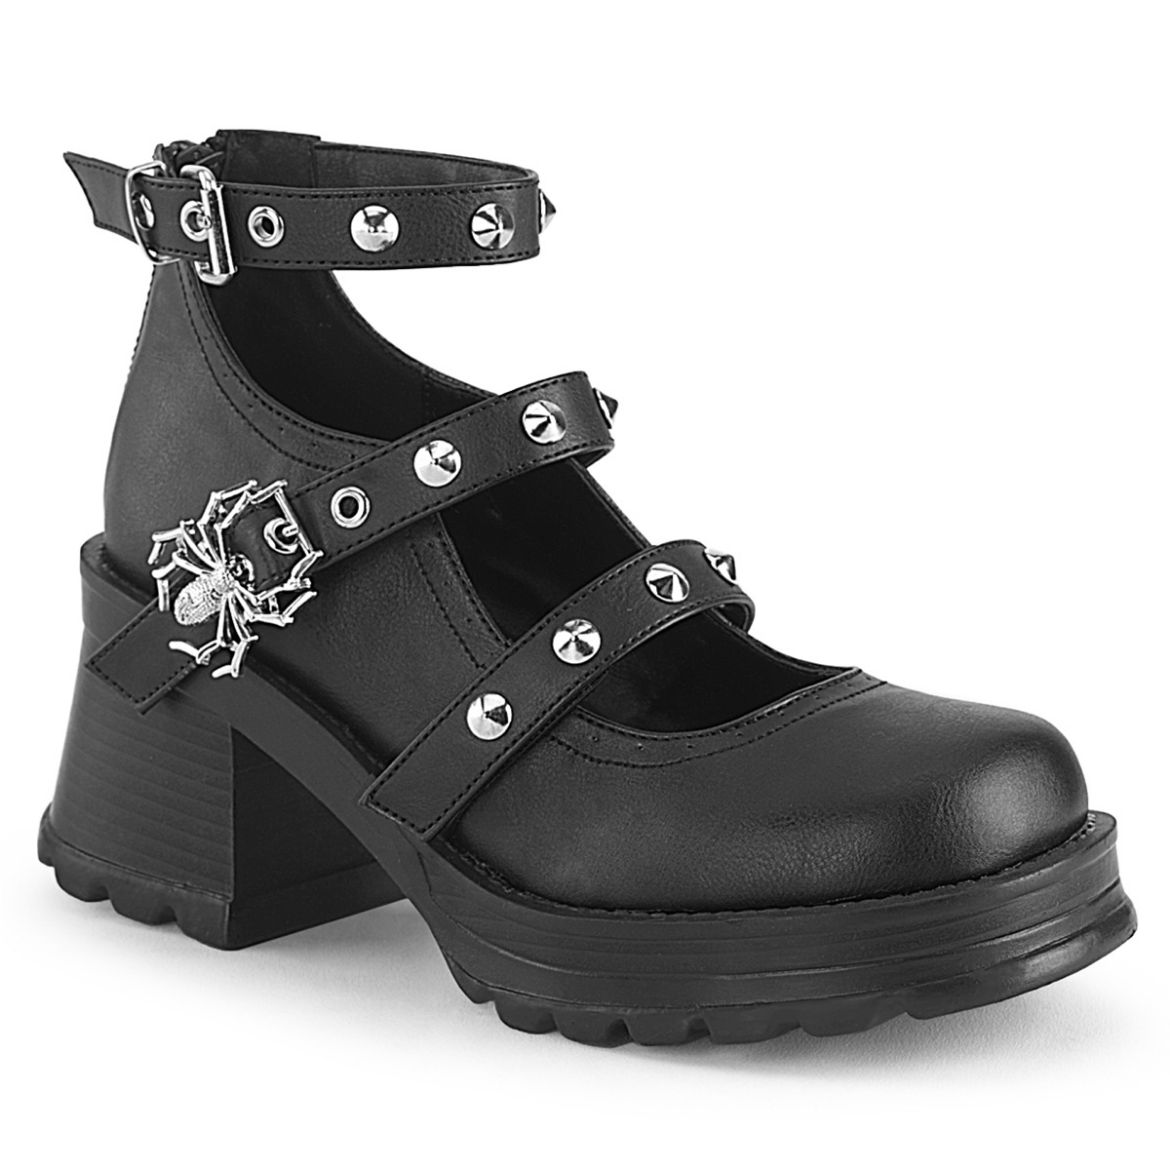 Product image of Demonia BRATTY-30 Blk Vegan Leather 2 3/4 Inch Heel 1 Inch Platform Ankle High Strappy Shoe